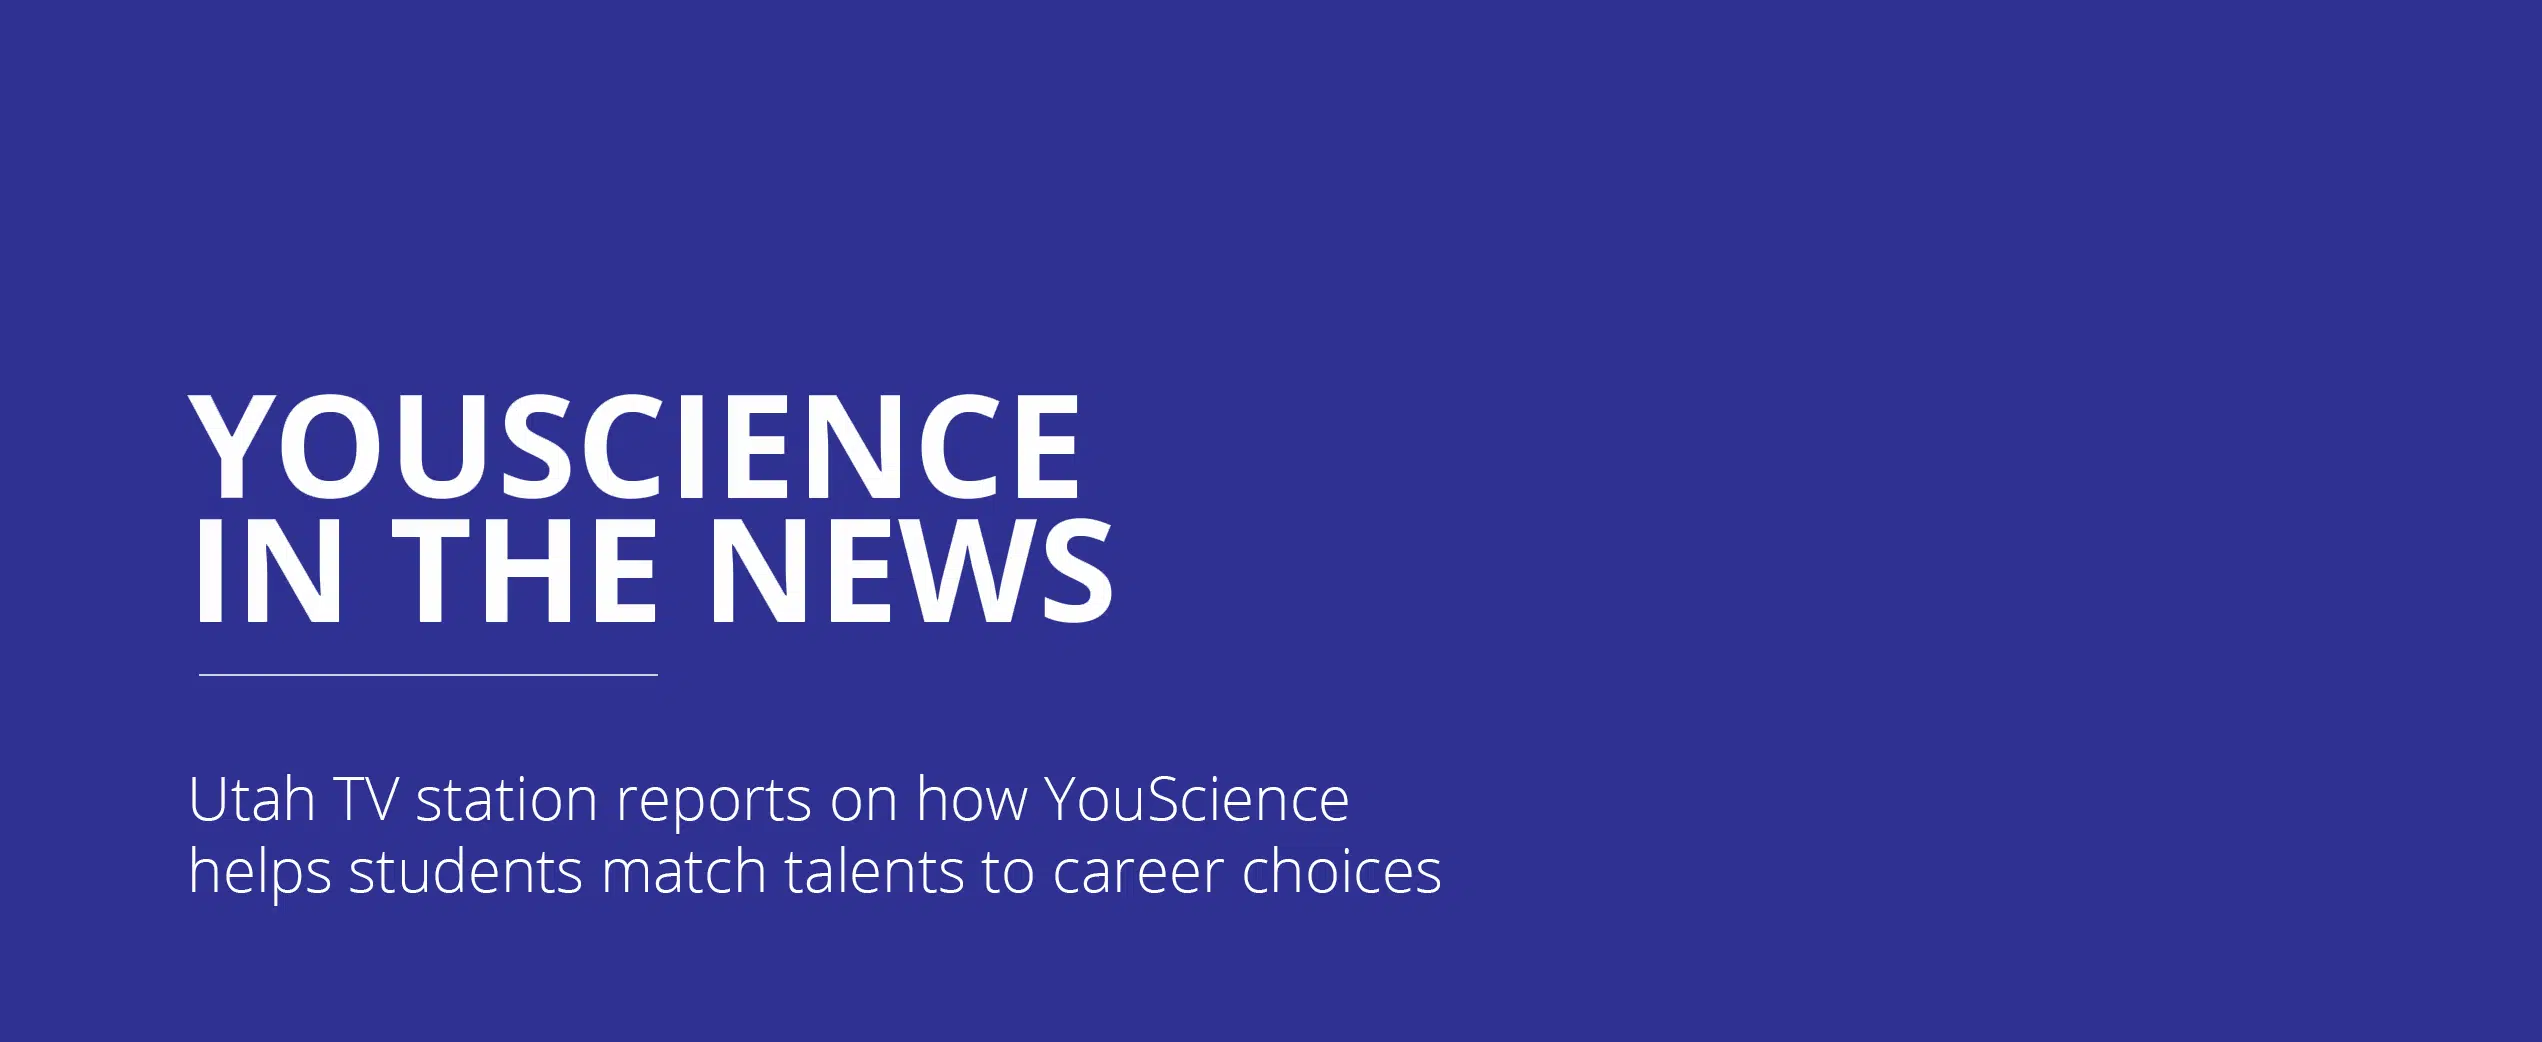 Utah TV station reports on how YouScience helps students match talents to career choices